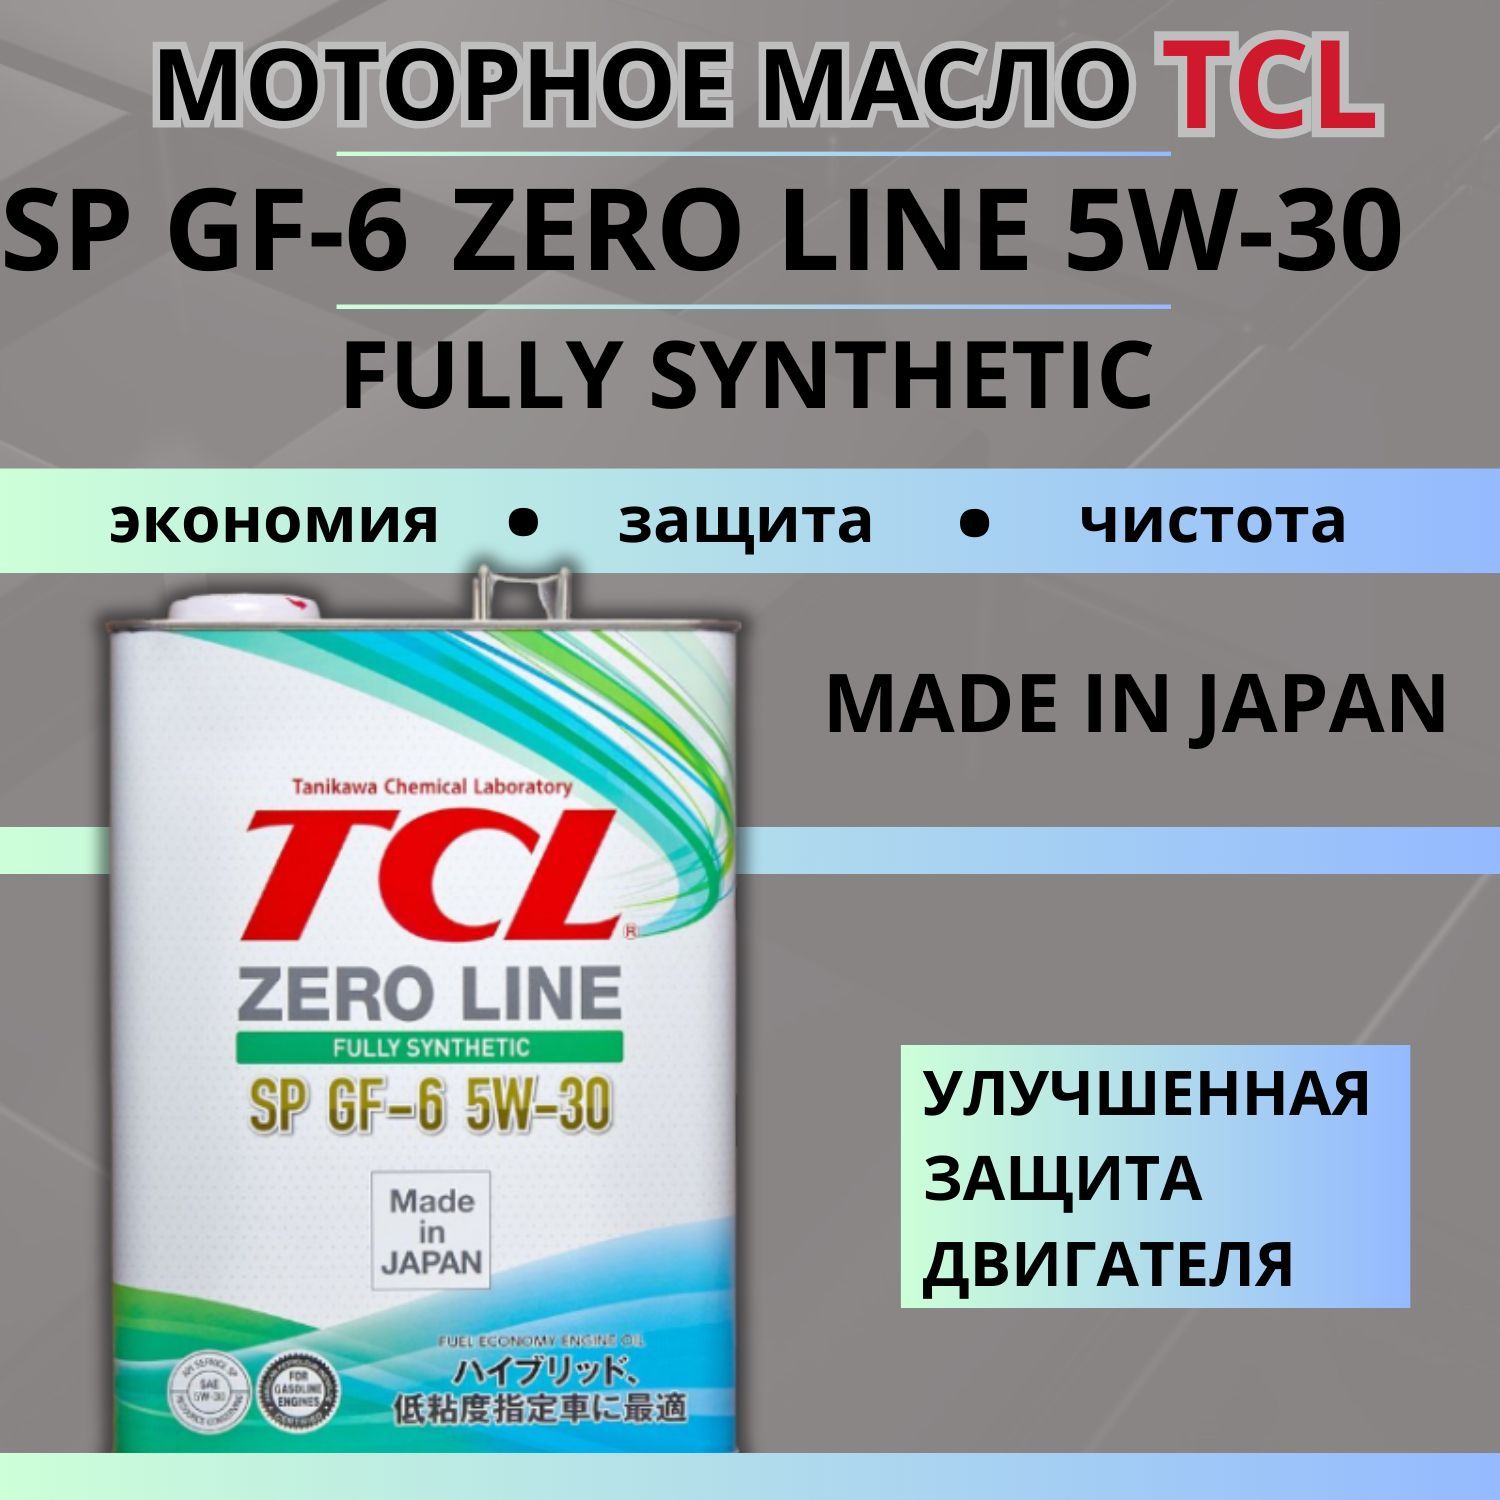 Масло tcl 5w 30. Моторное масло ТСЛ 0w20. Масло TCL 0w20. TCL масло моторное 0w-20 4л. Моторное масло TCL 0w30.